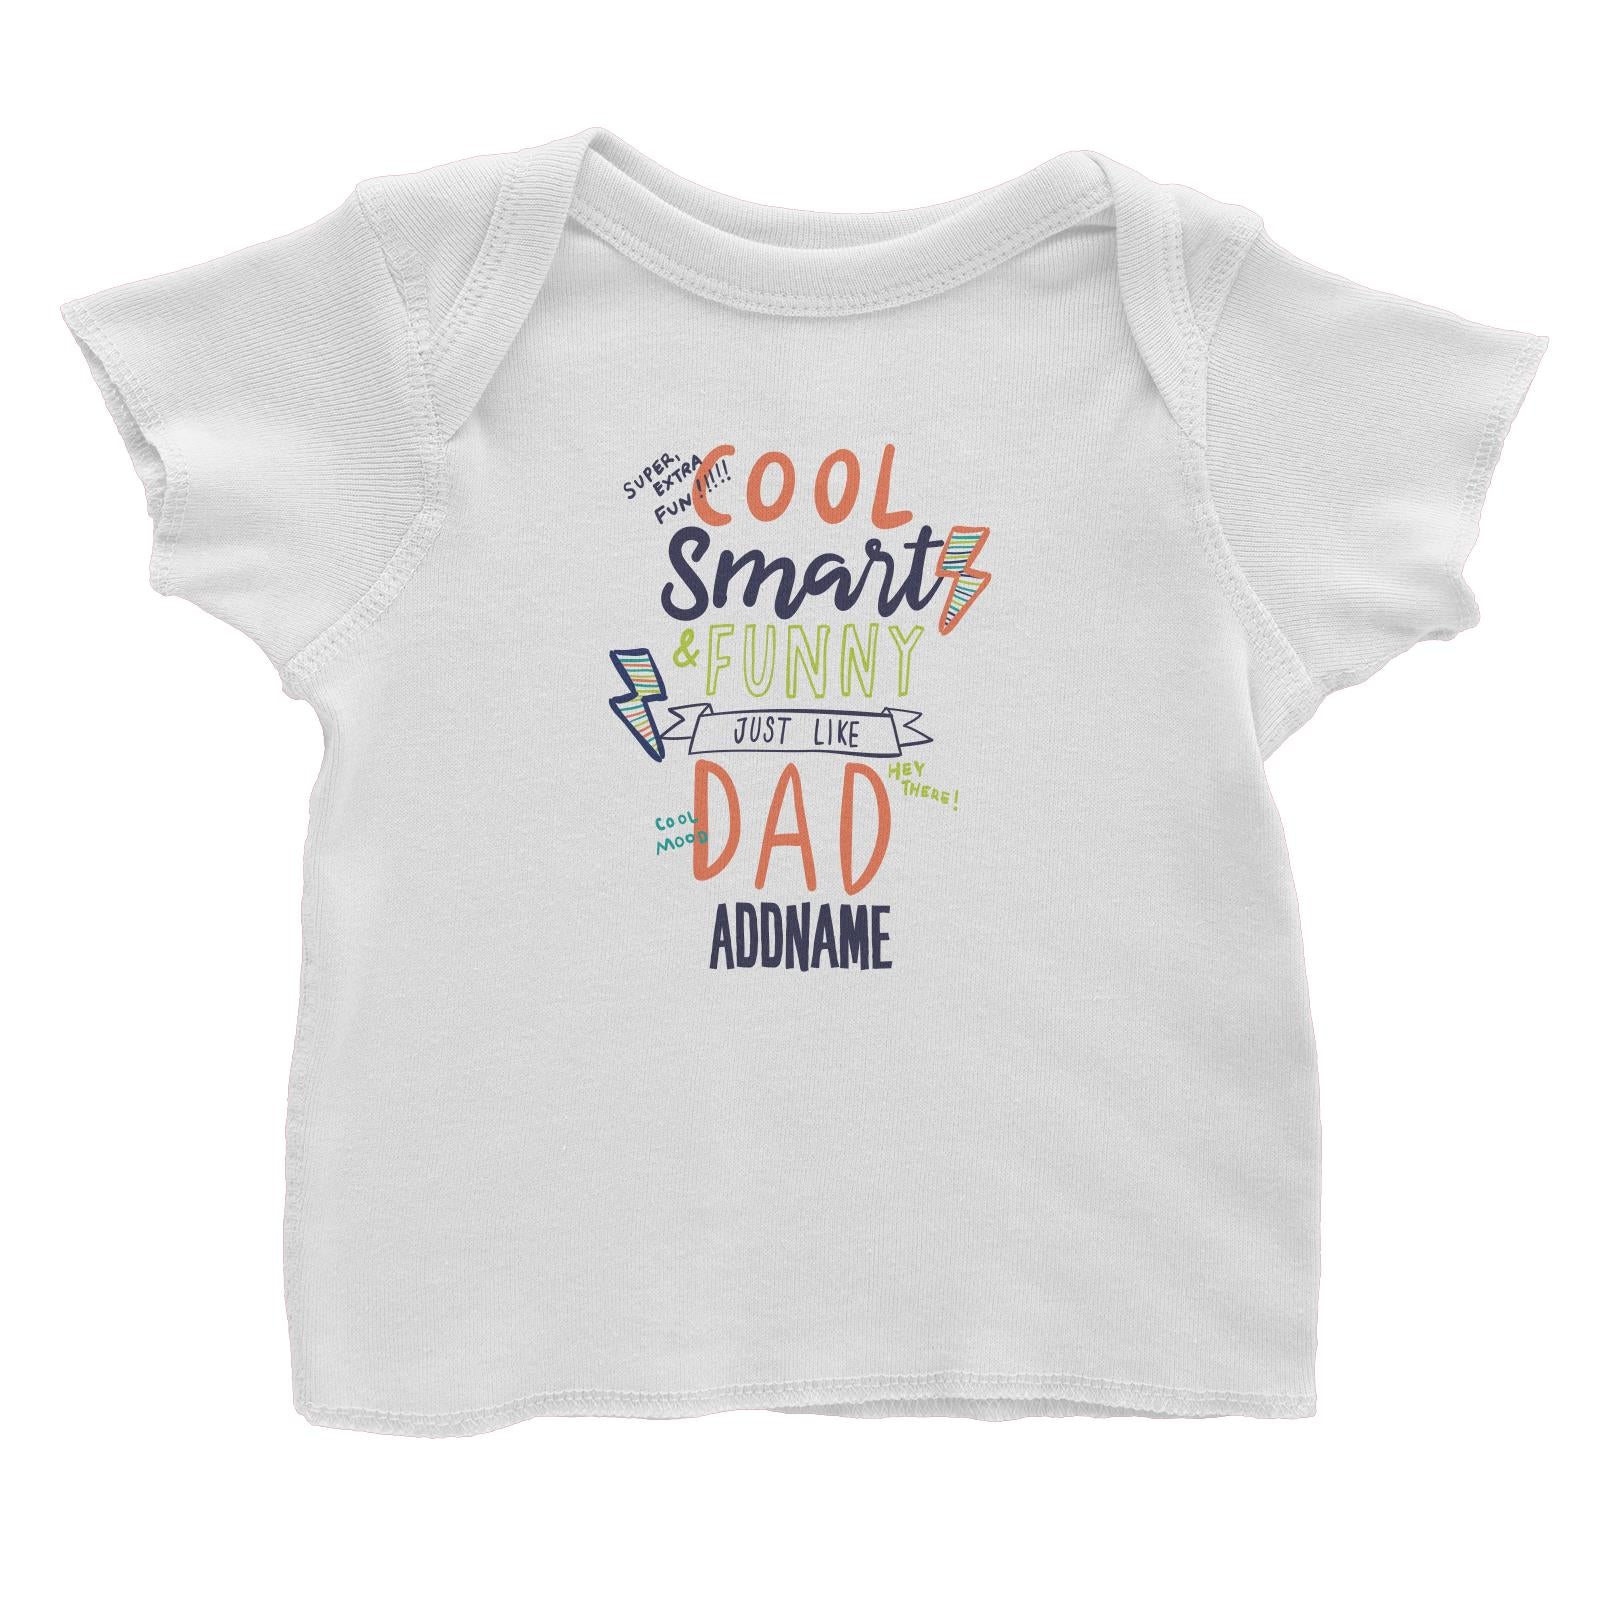 Cool Vibrant Series Cool Smart Funny Just Like Dad Addname Baby T-Shirt [SALE]